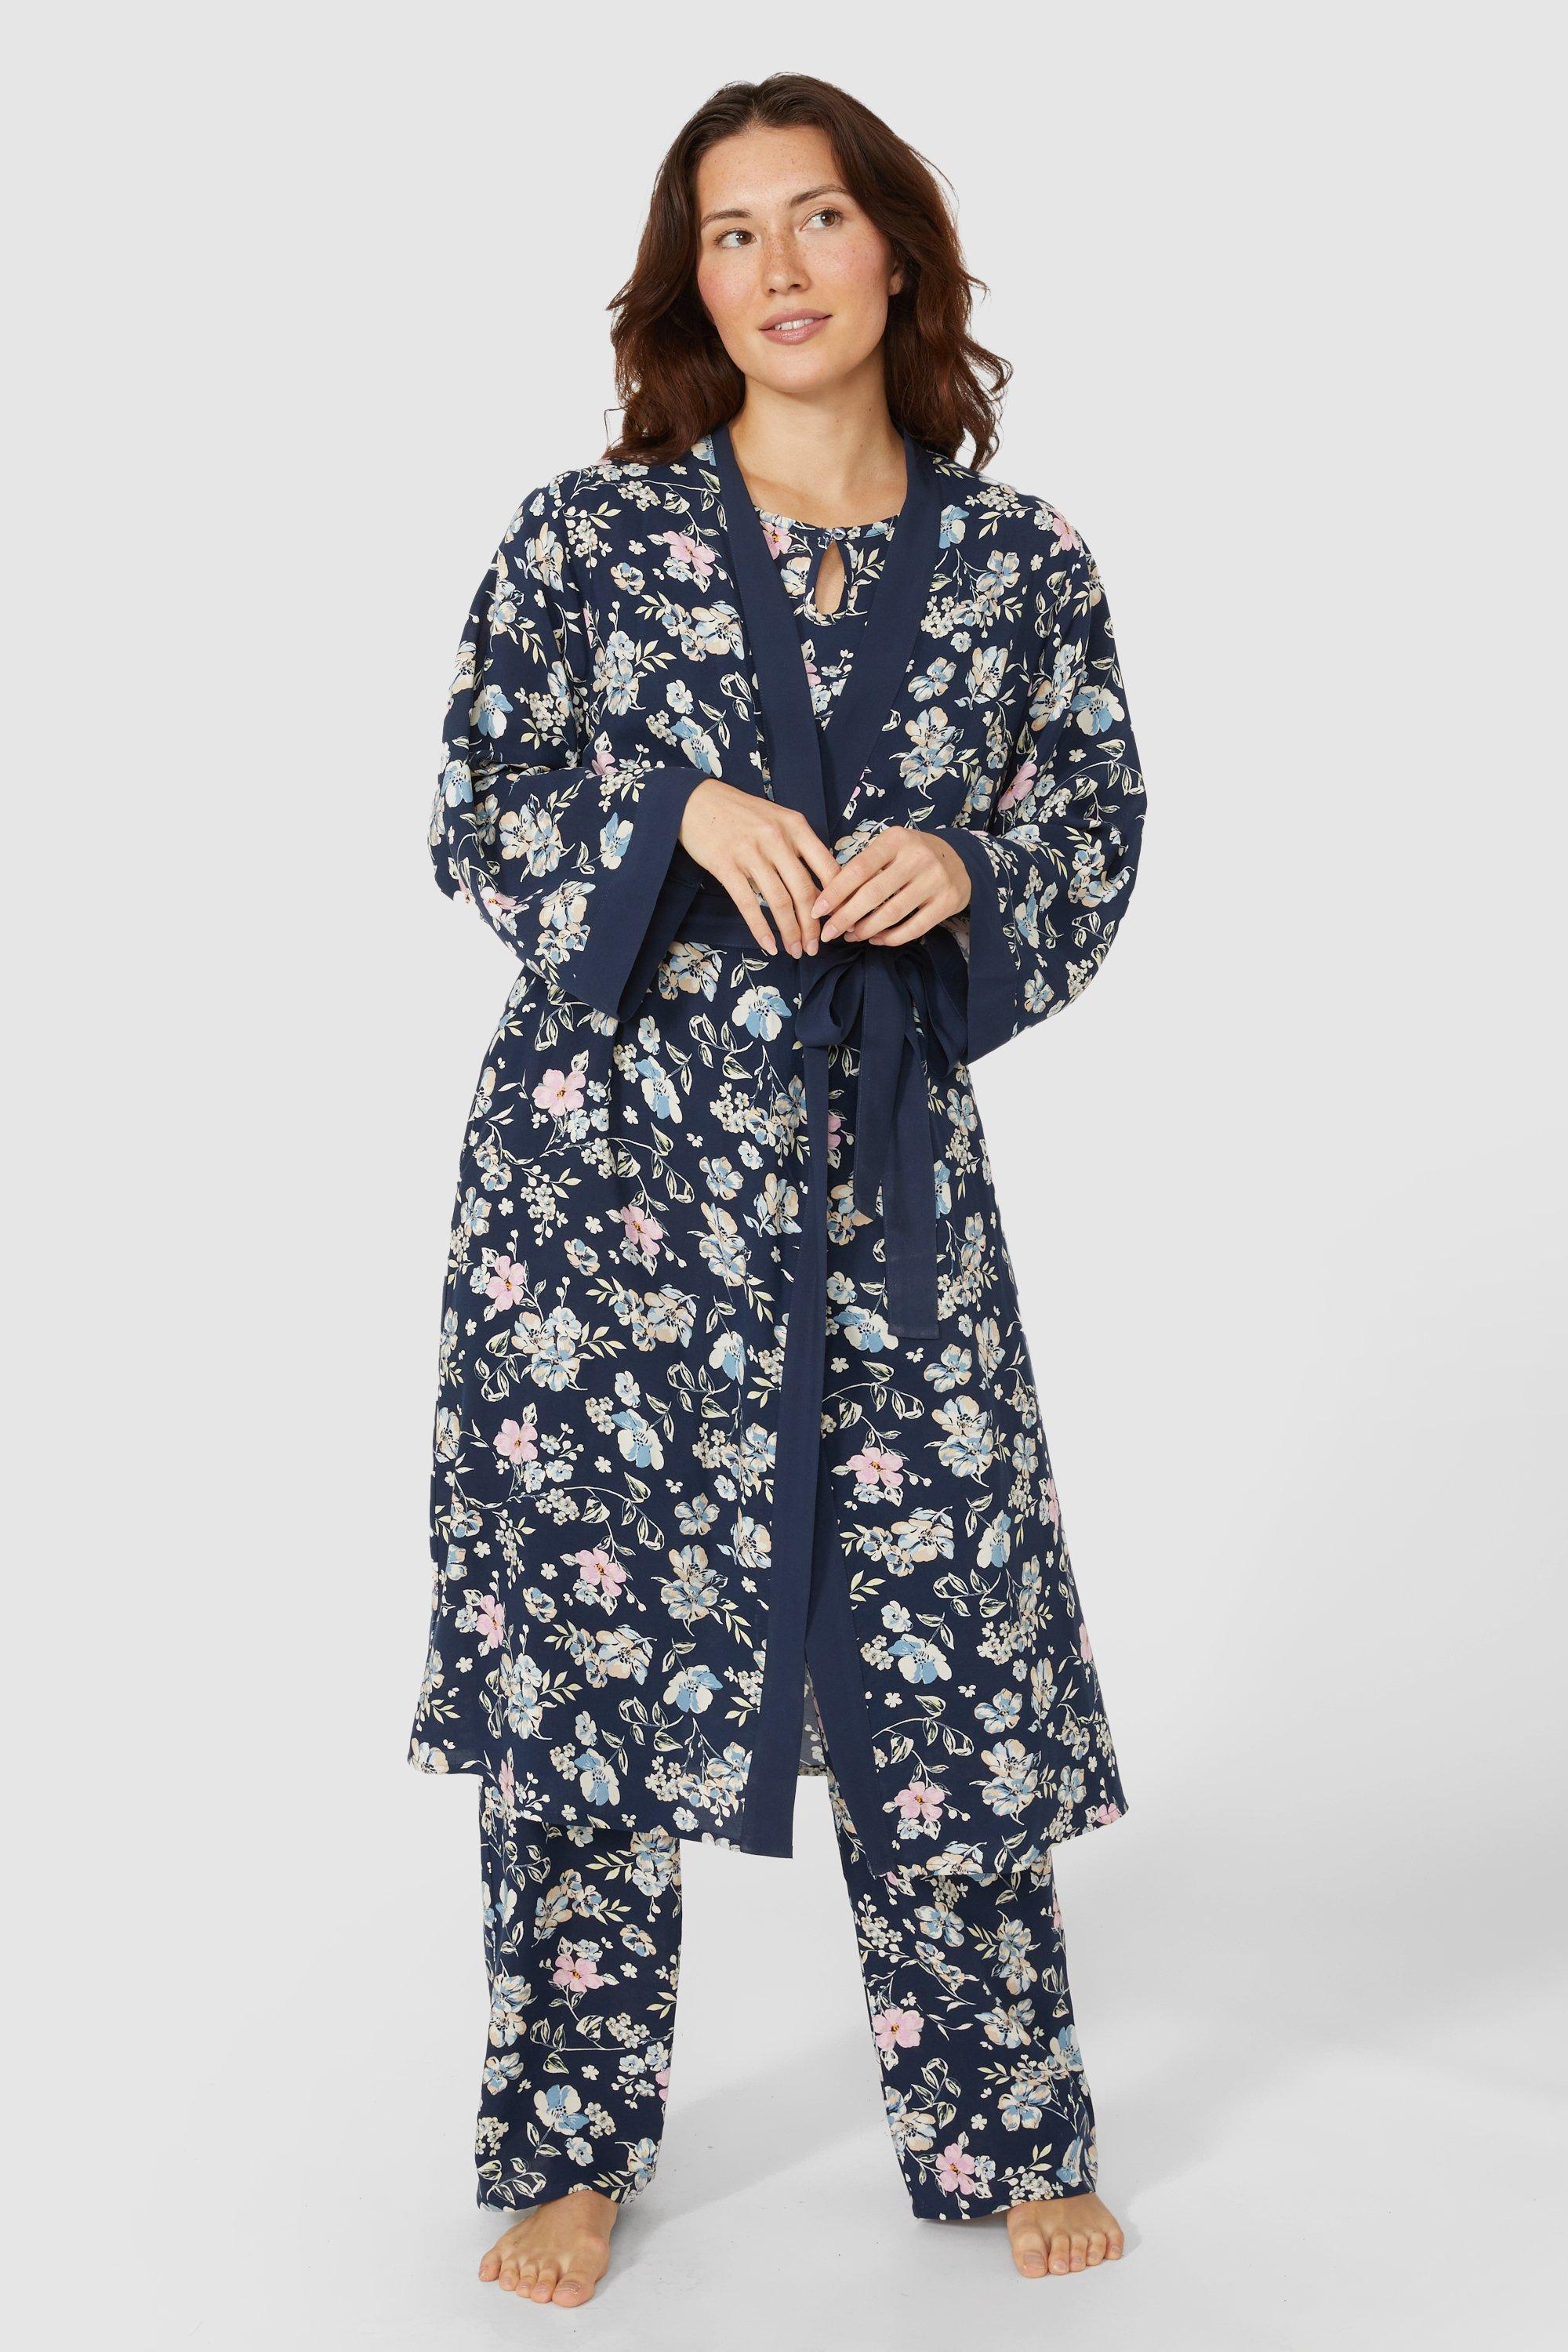 Woven Viscose Floral Printed Wrap